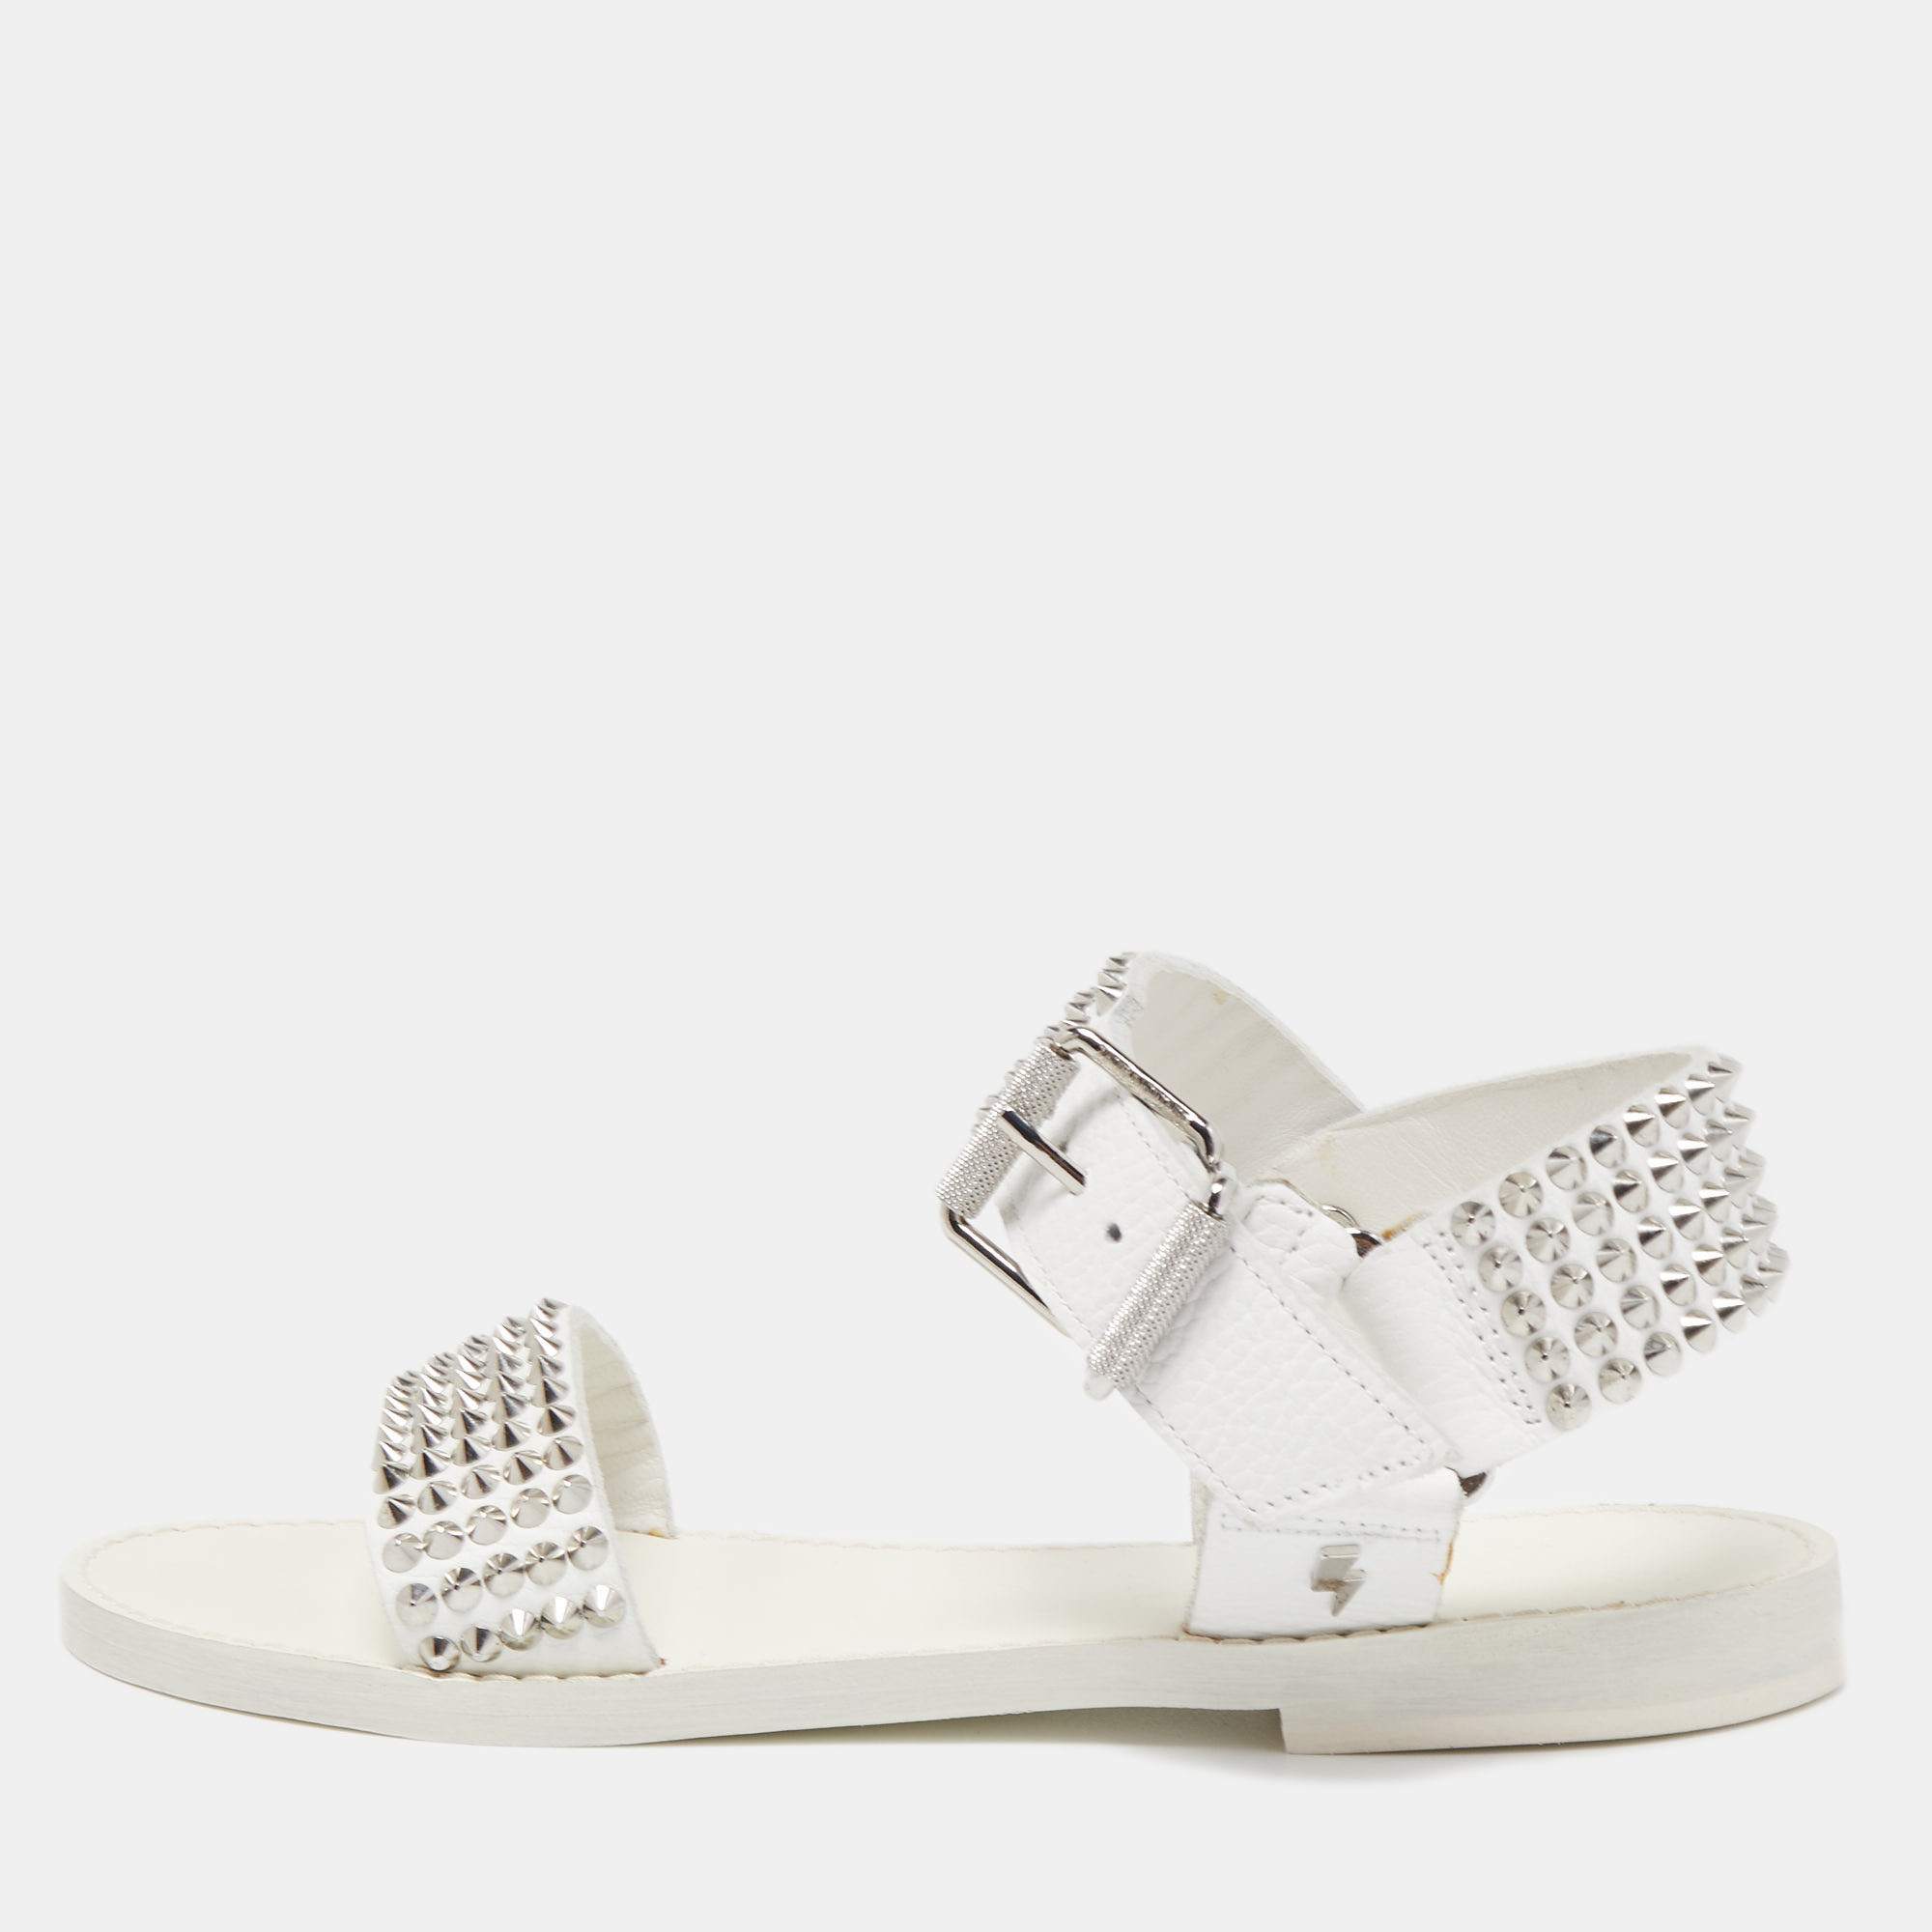 

Zadig & Voltaire White Leather Ankle Strap Spiked Sandals Size